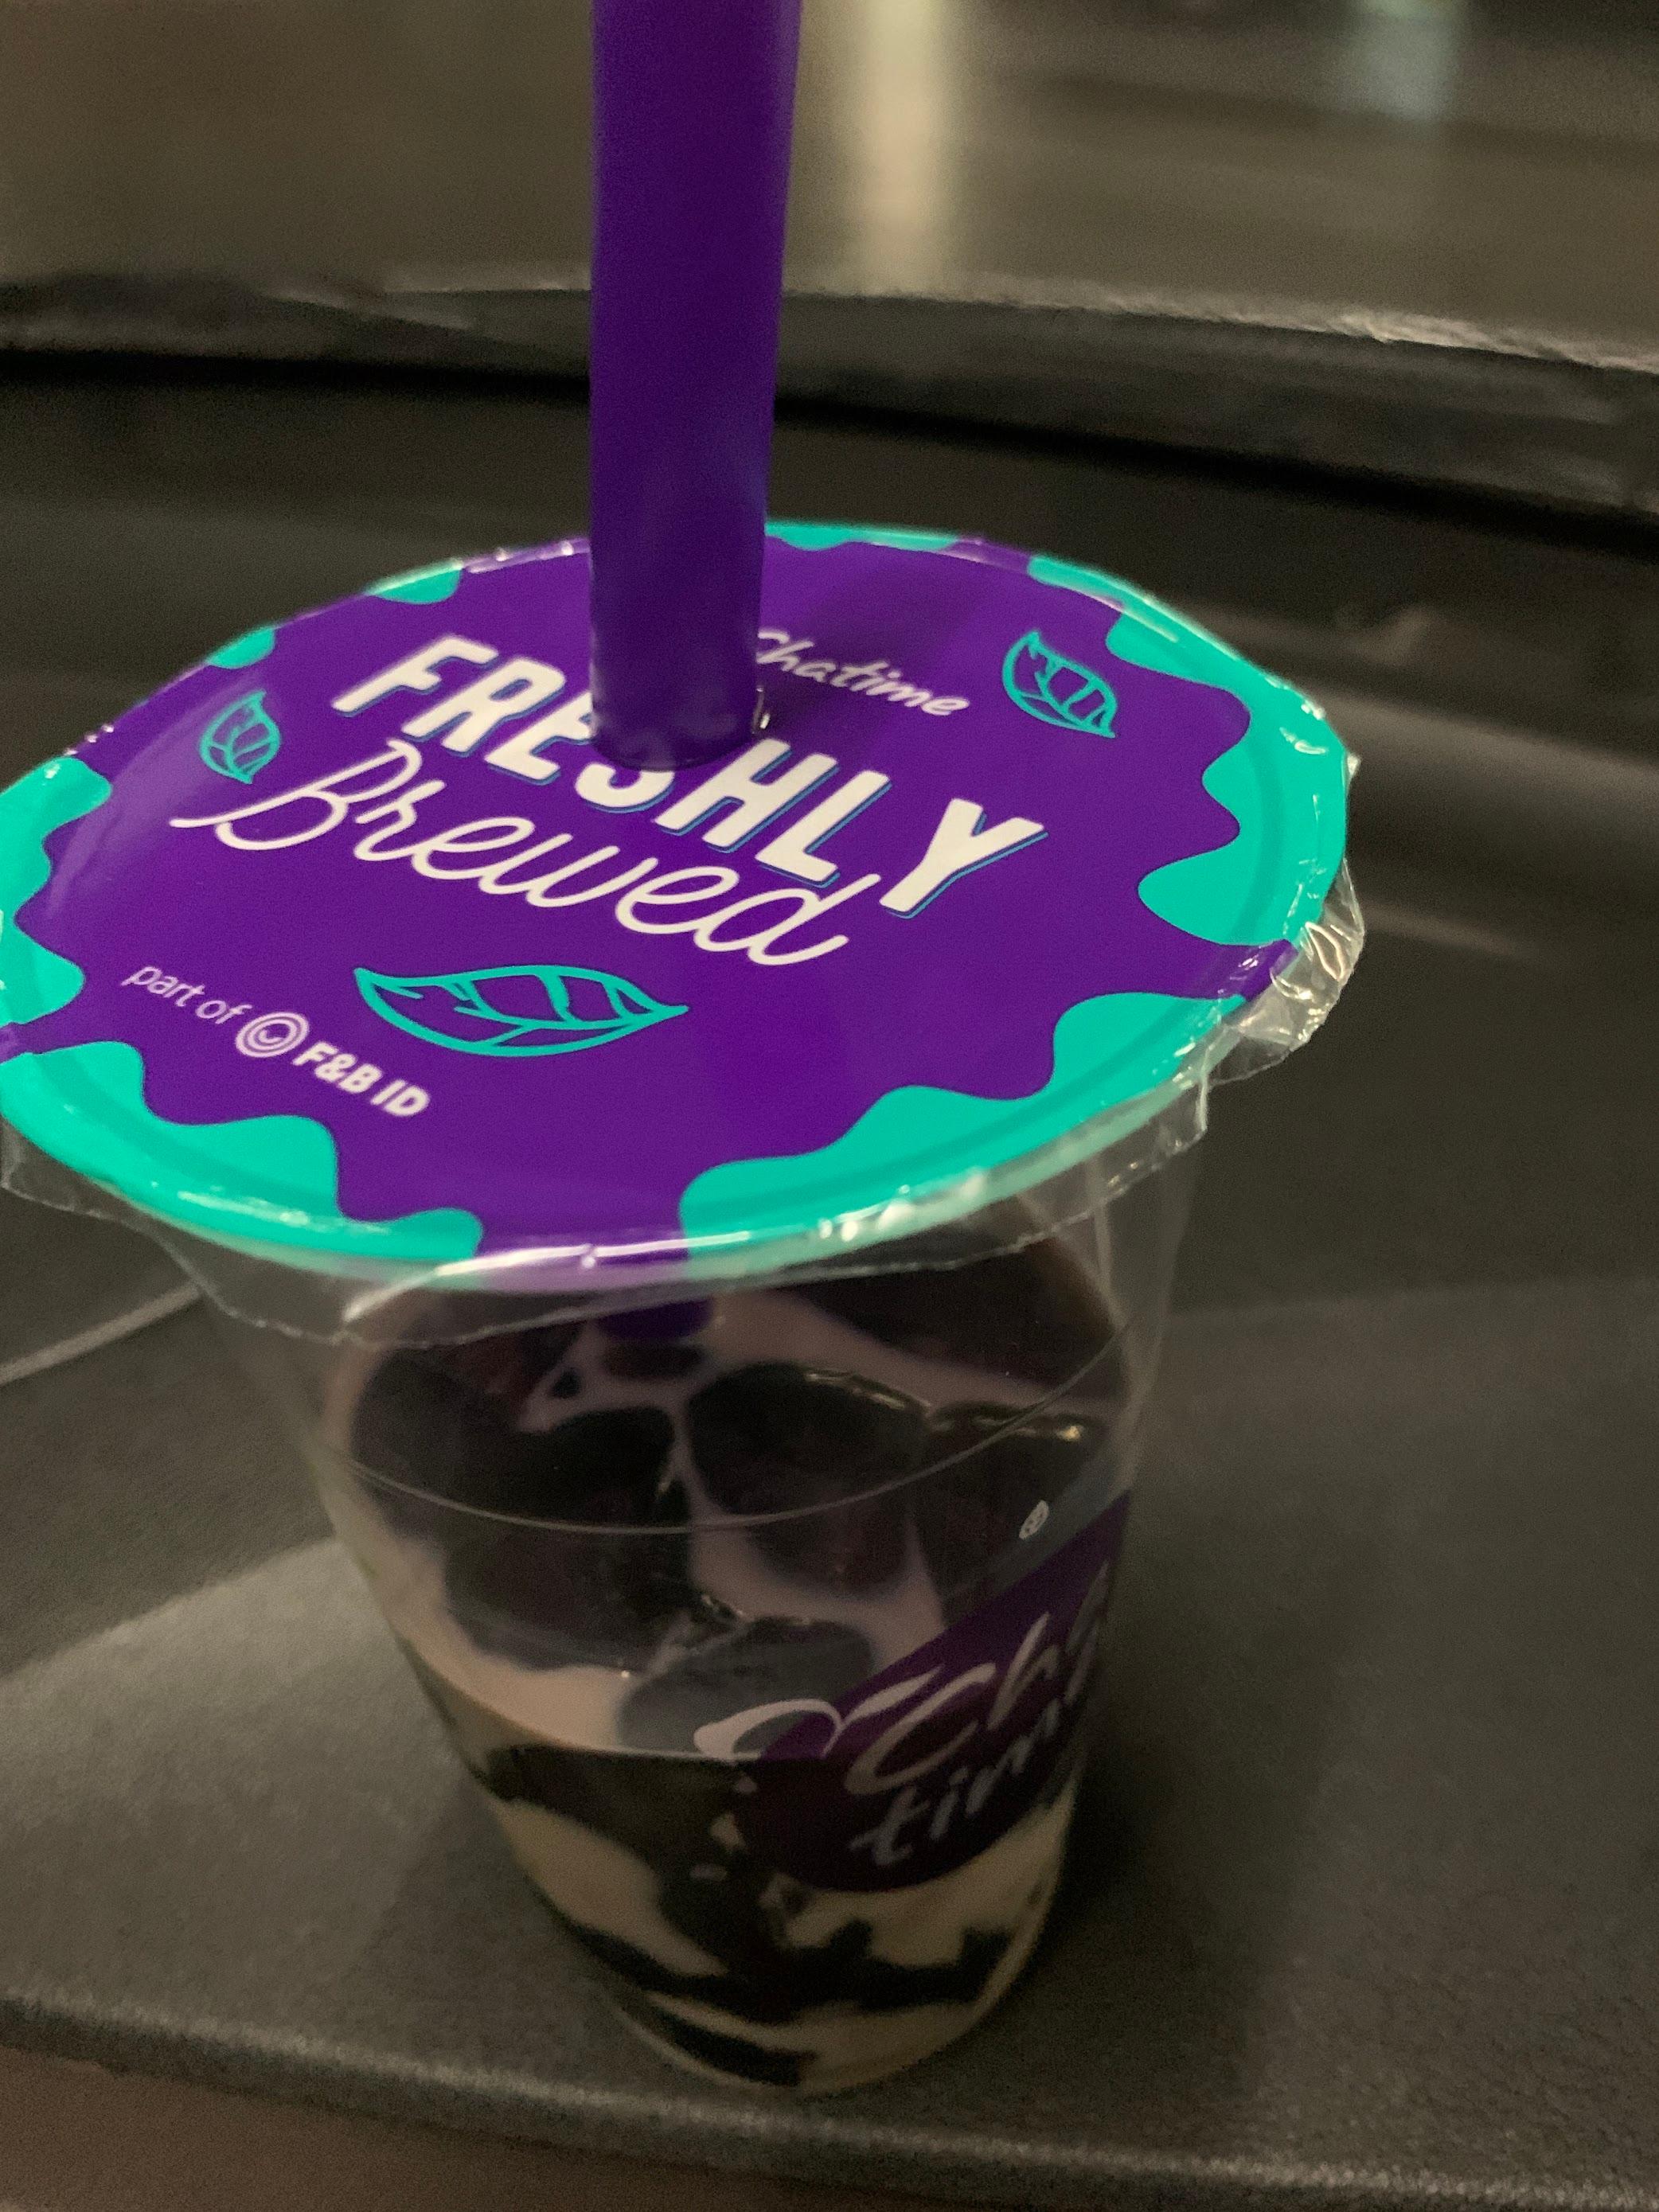 Chatime - The Breeze review